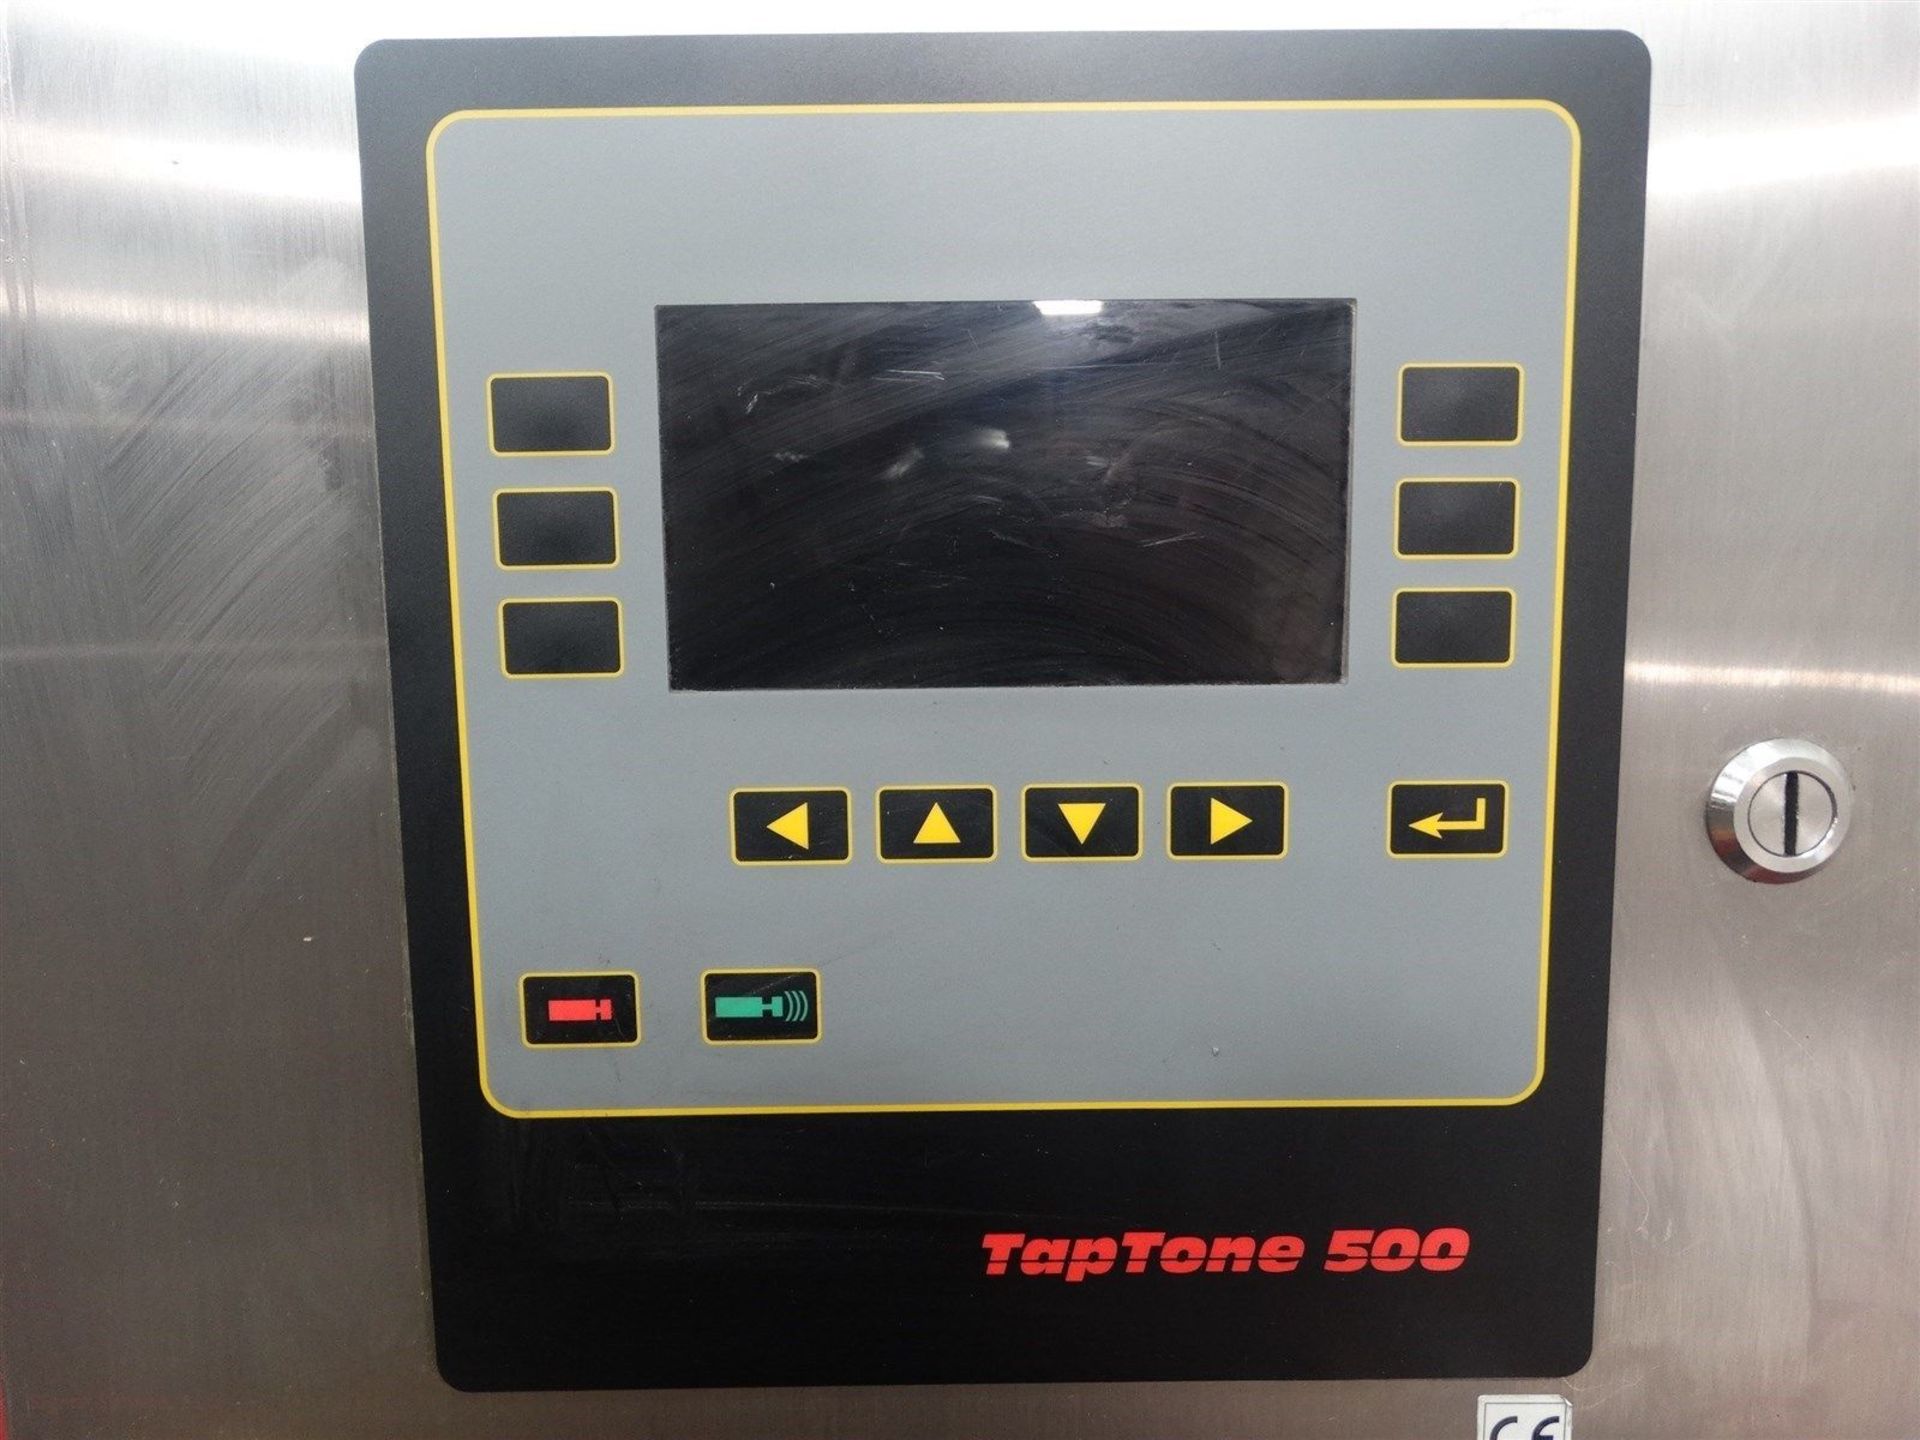 Taptone 500 Weight Inspection System D-407-26-E (Rigging Fee - $100) - Image 2 of 10